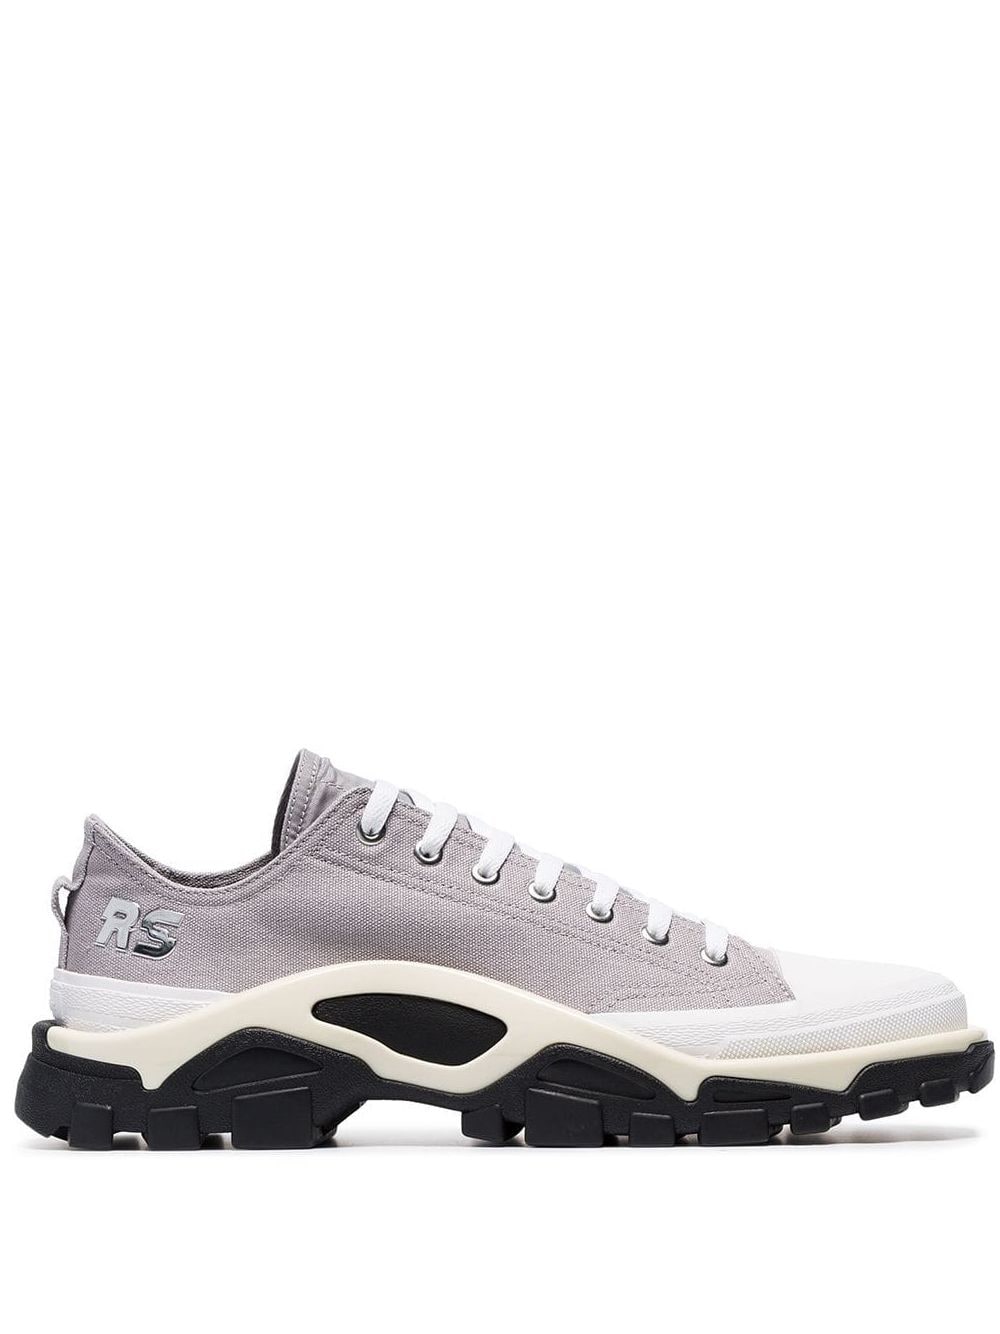 adidas x Raf Simons Detroit Runner contrast sole low-top cotton sneakers - Grey von adidas